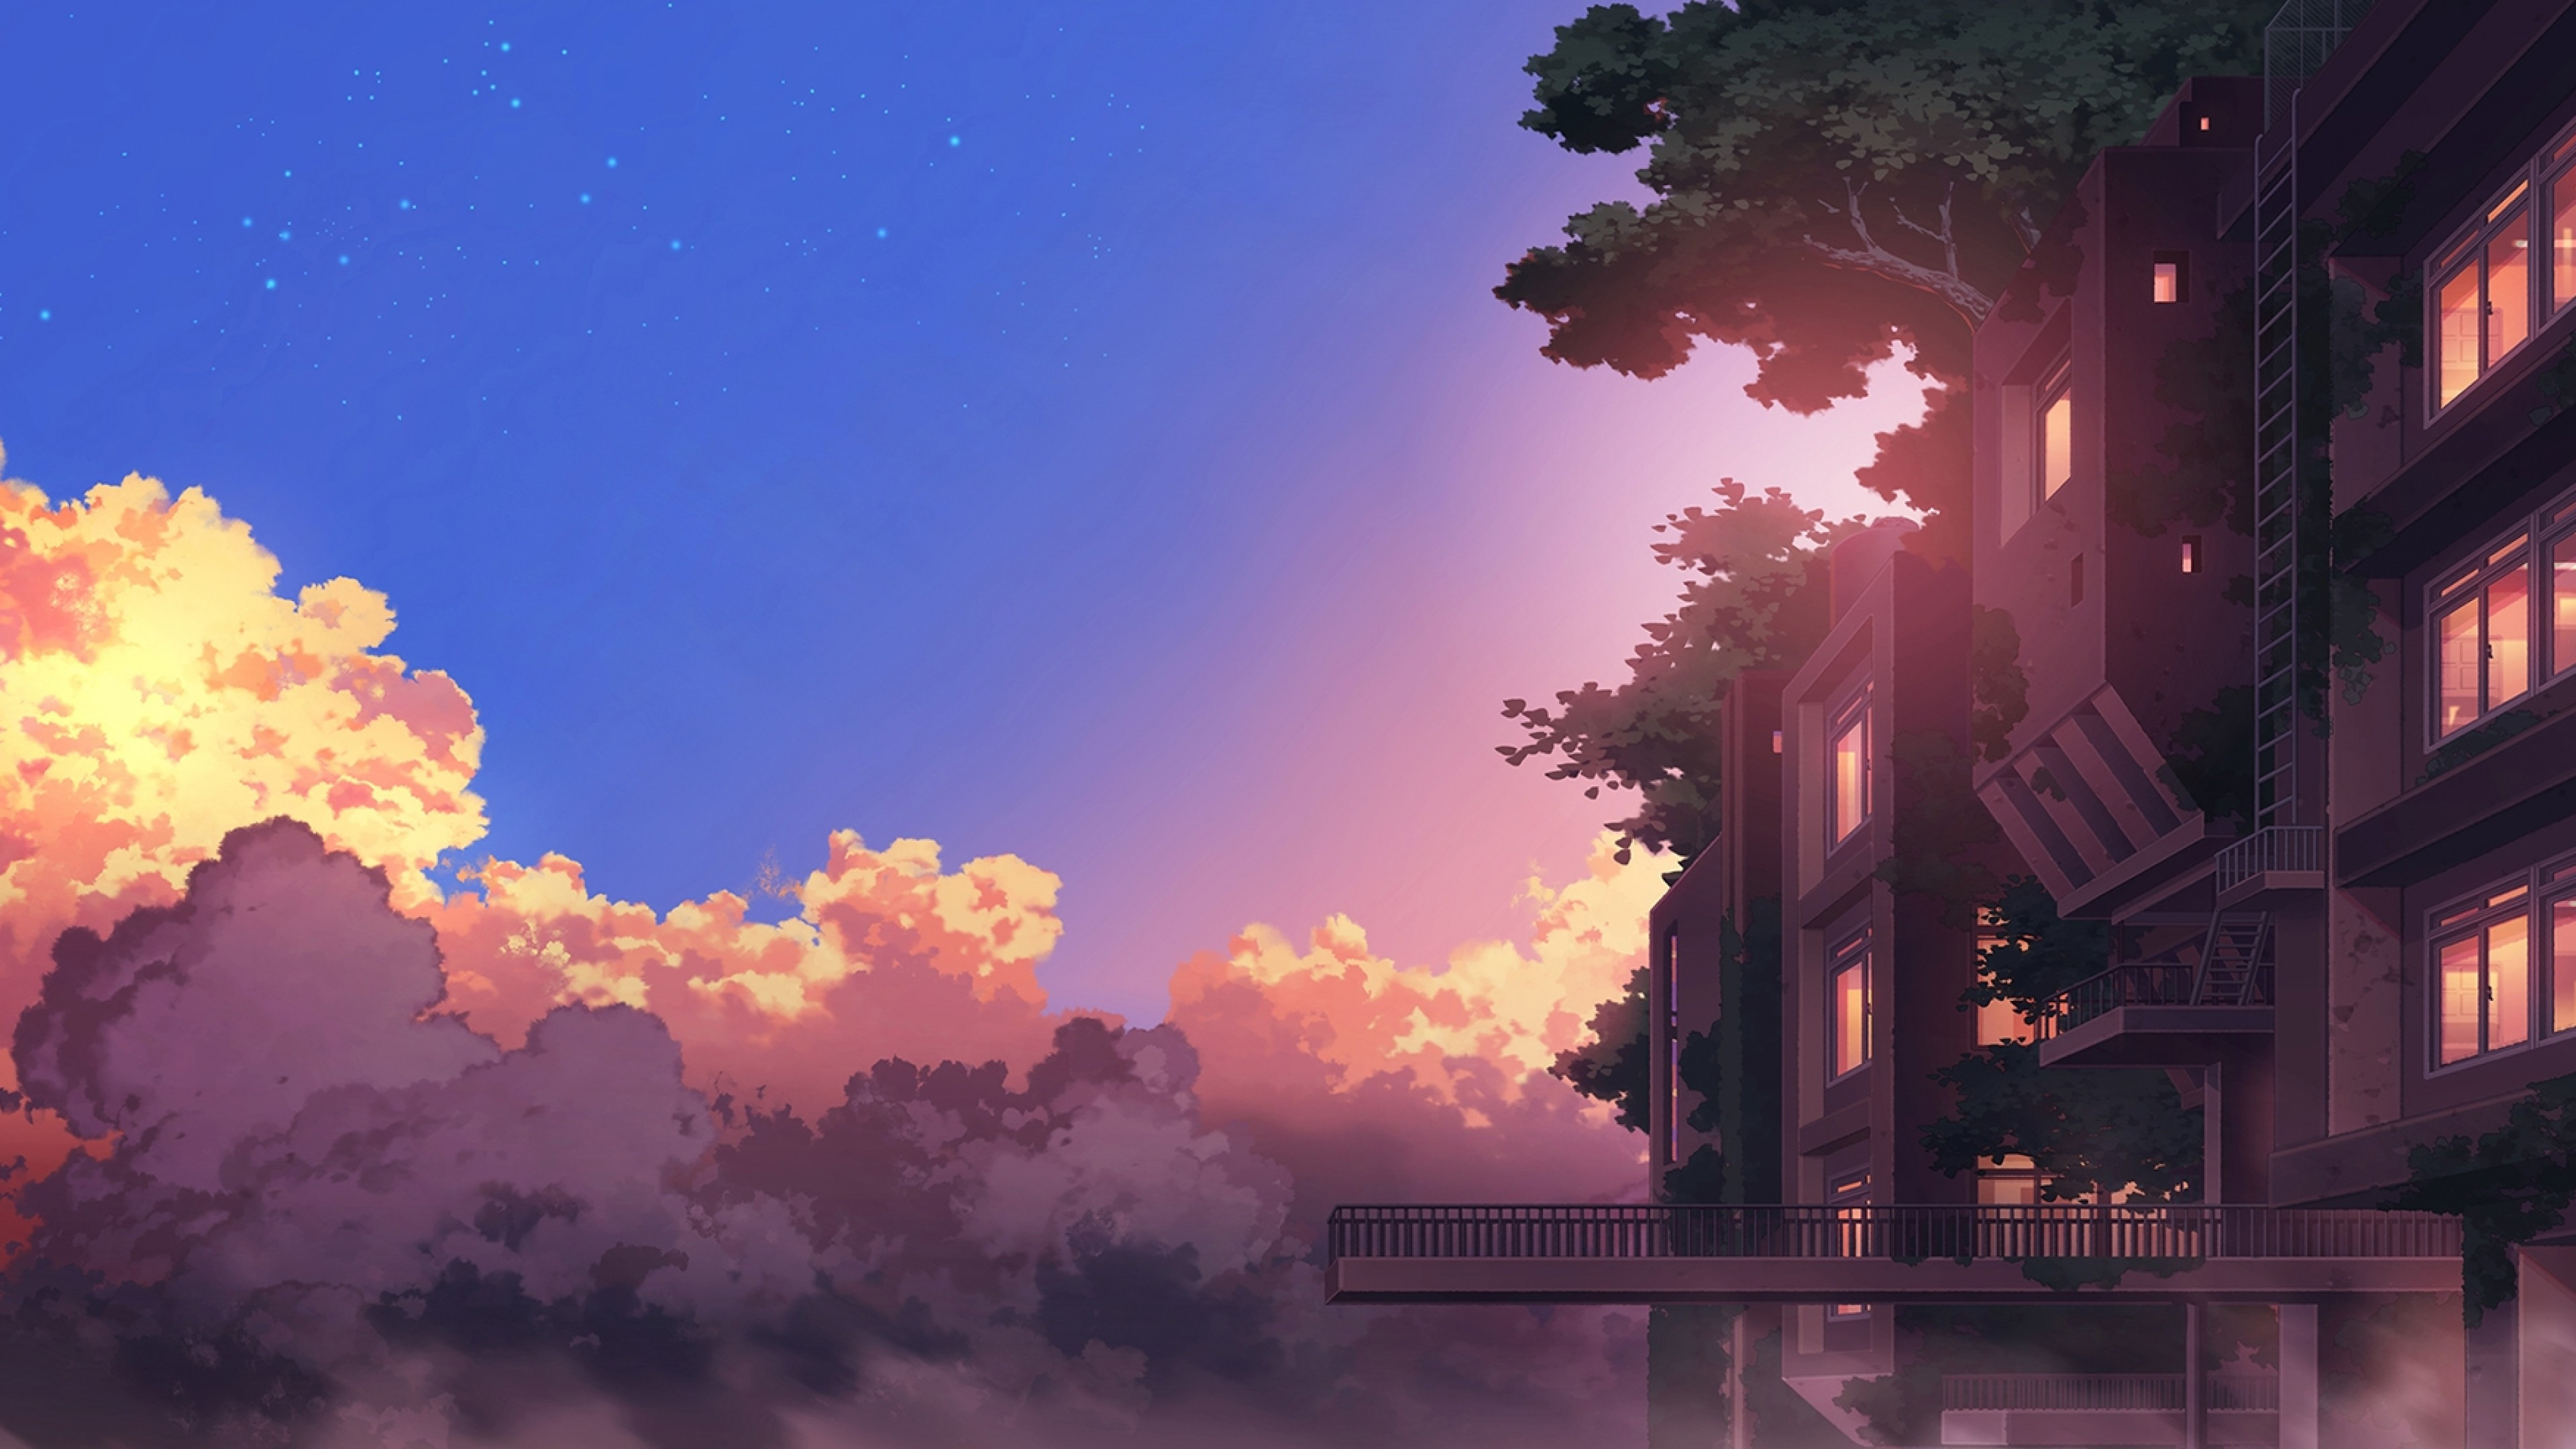 Download 3840x2160 Anime Landscape, Building, Sunset, Clouds, Scenic Wallpaper for UHD TV